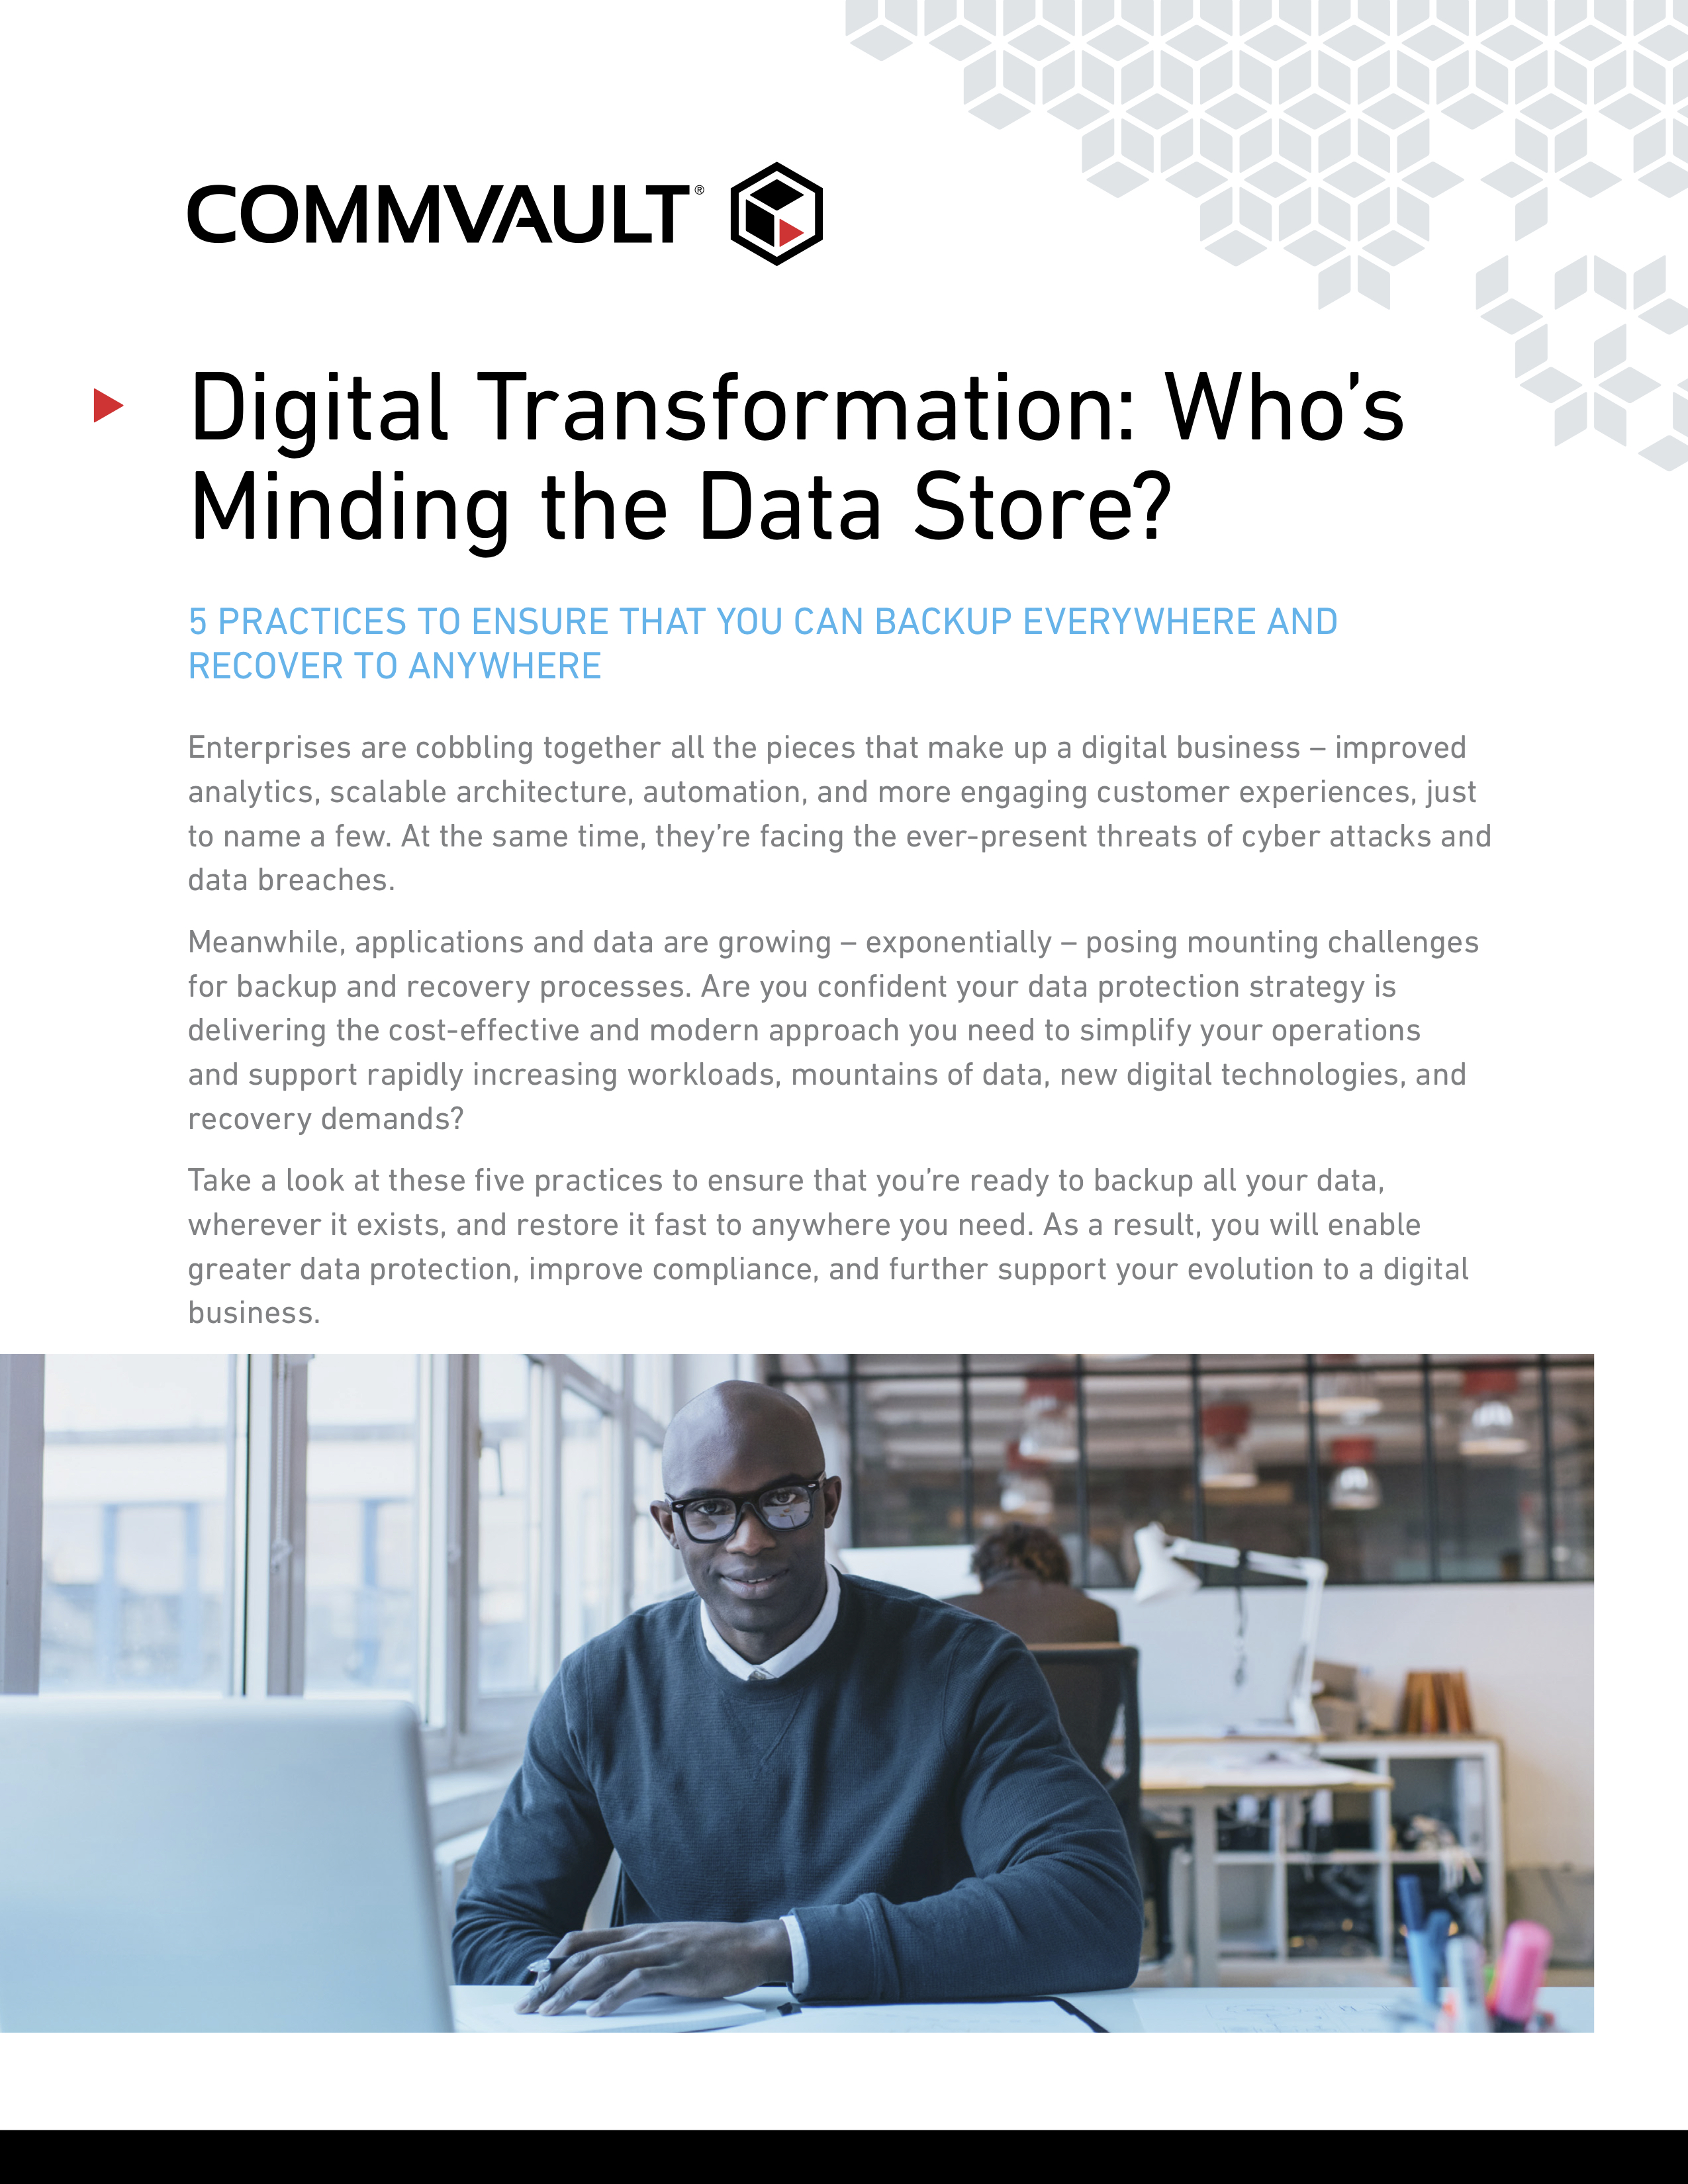 Digital Transformation: Who's Minding the Data Store?